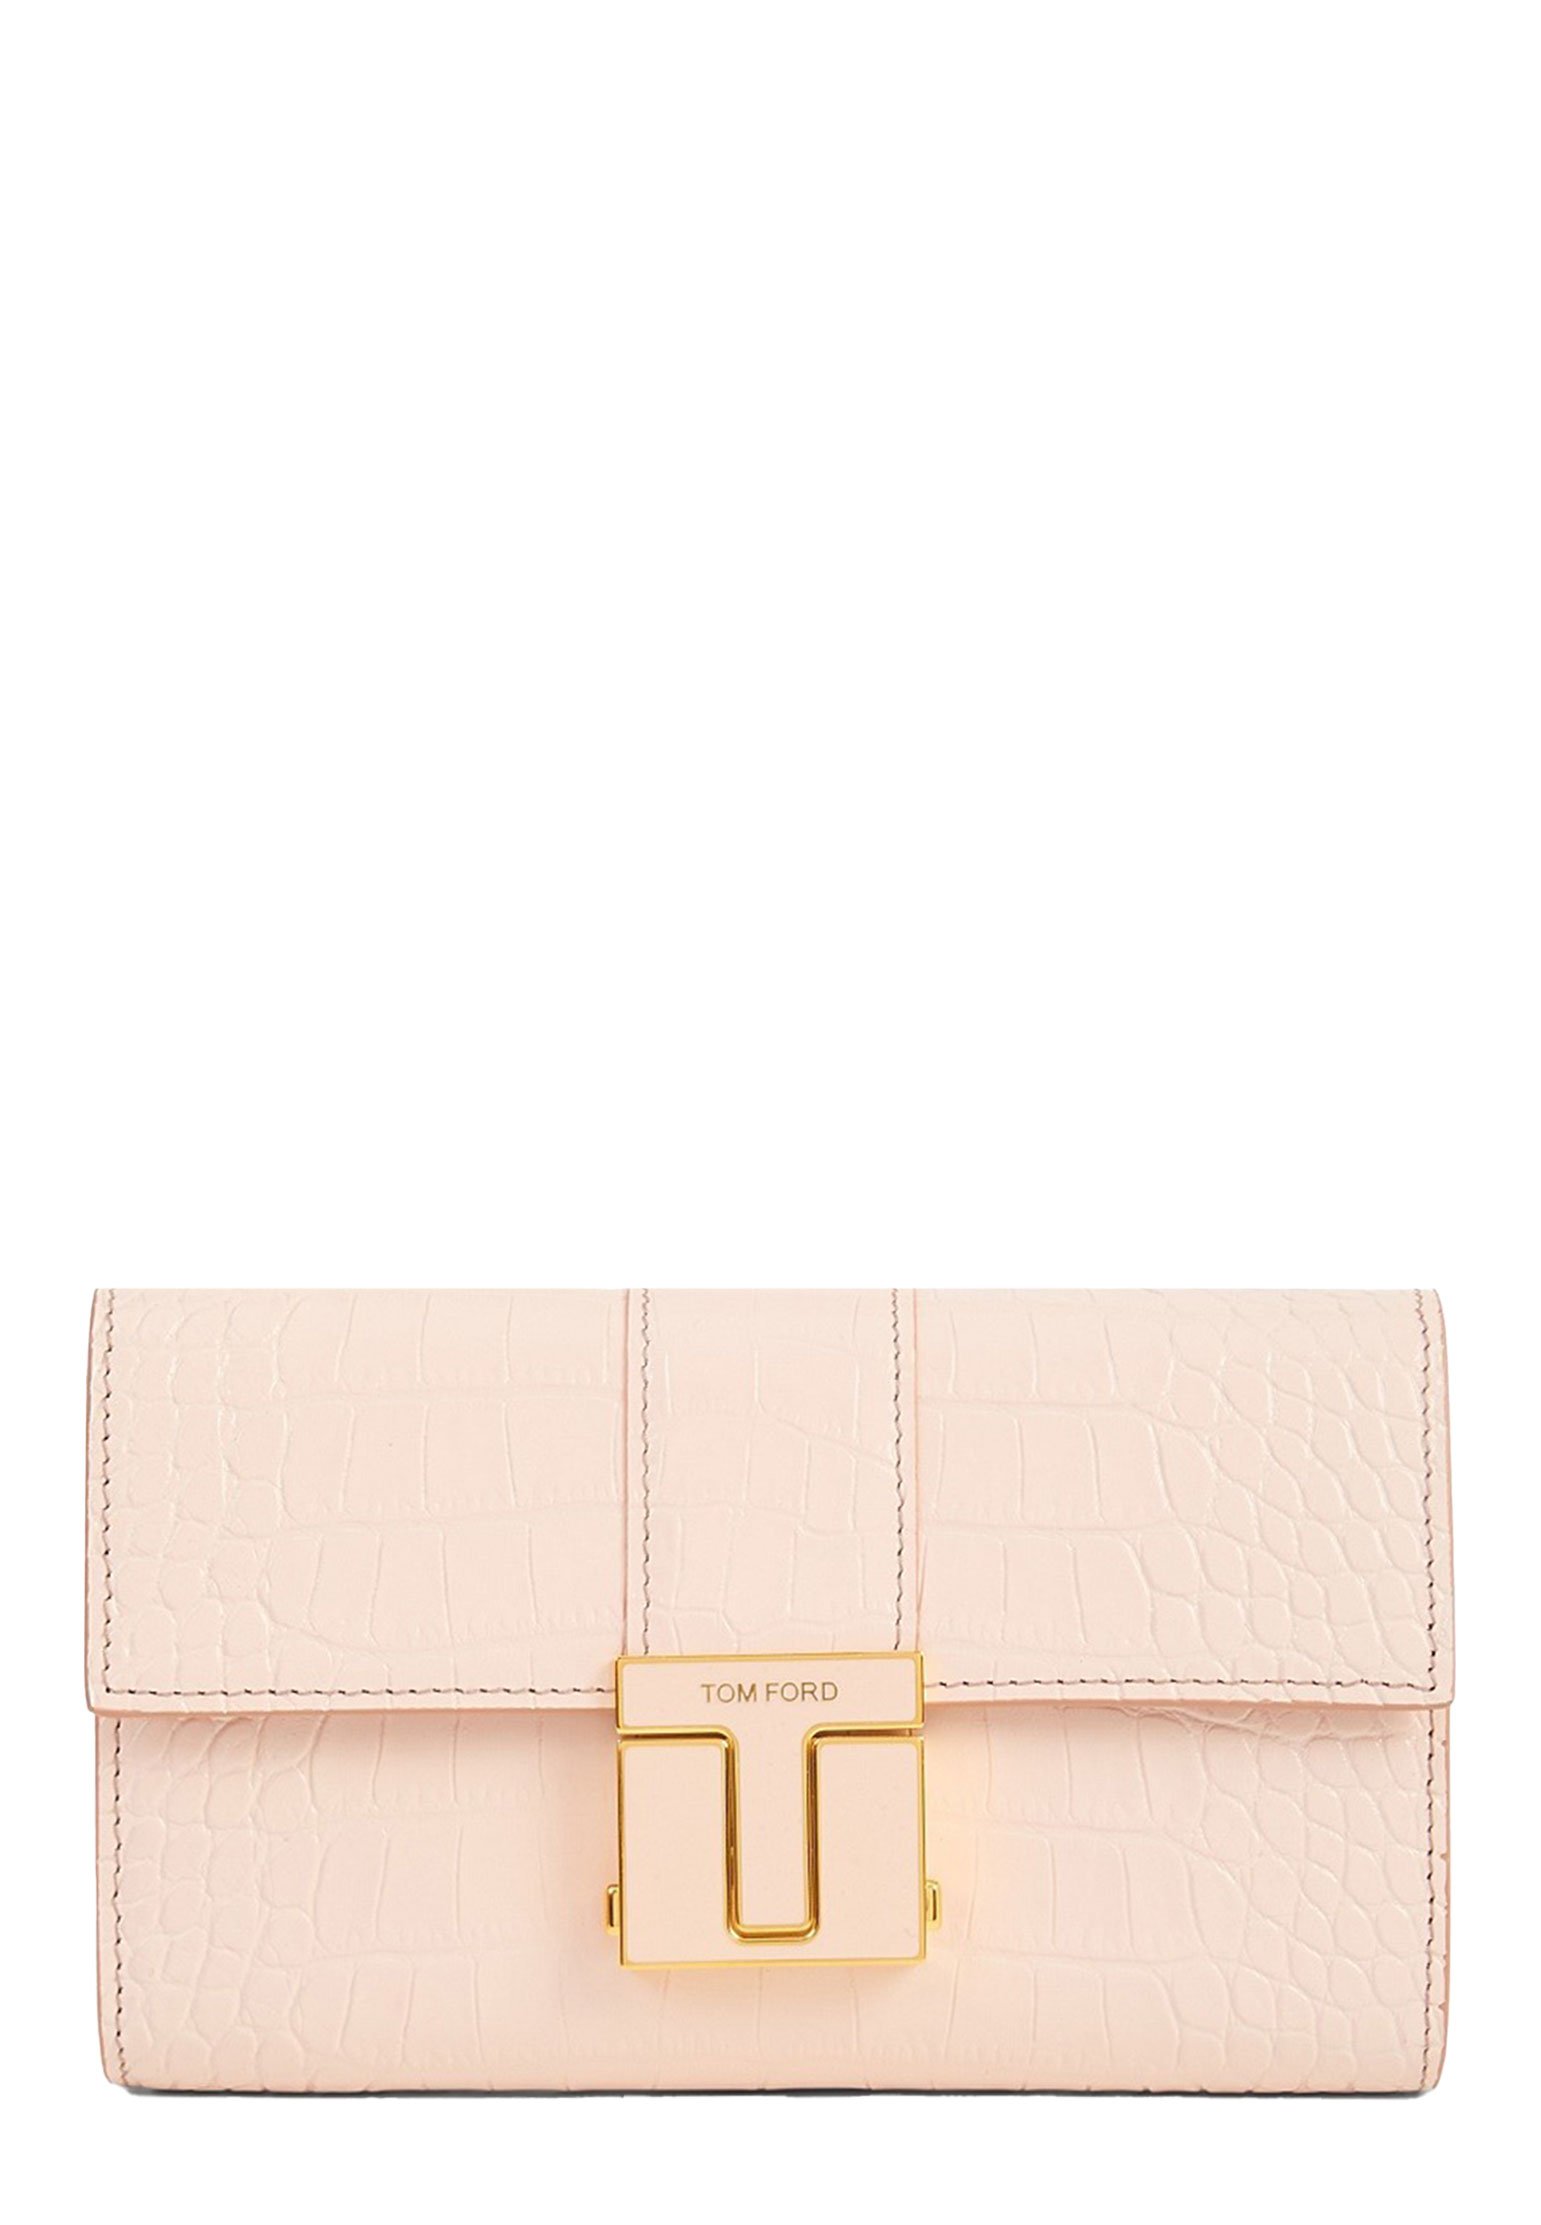 Bag TOM FORD Color: poudre (Code: 1944) in online store Allure